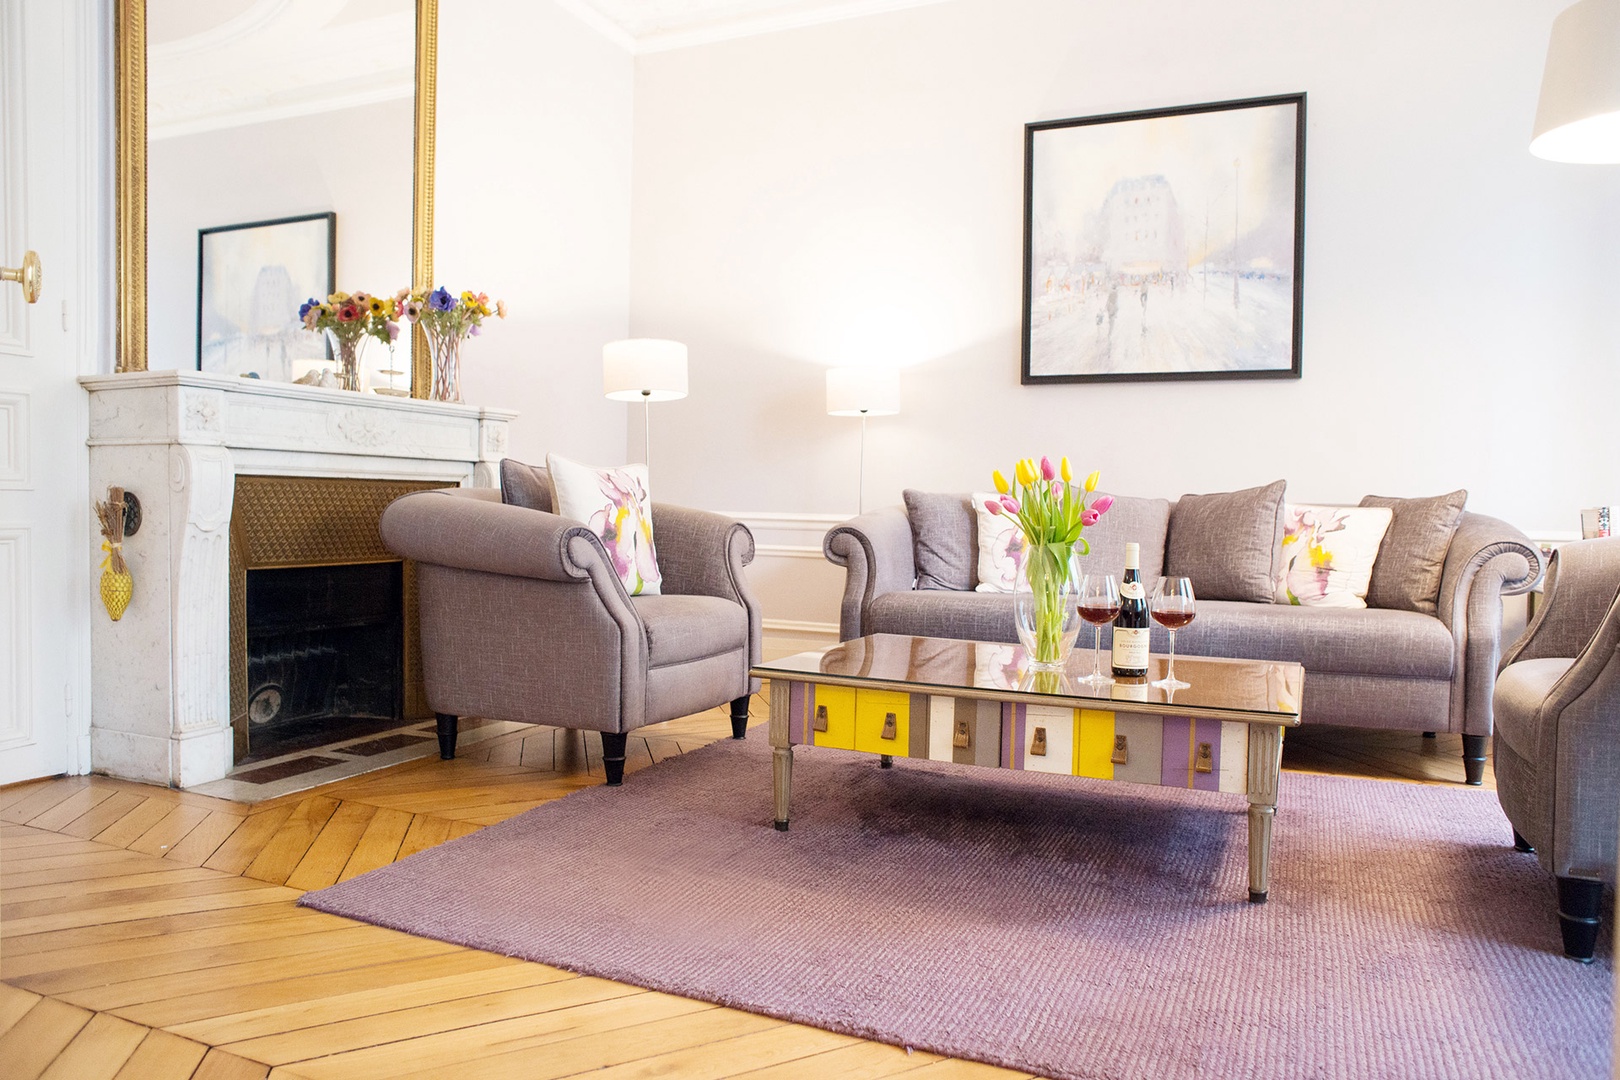 The décor in this stylish apartment is warm and elegant.